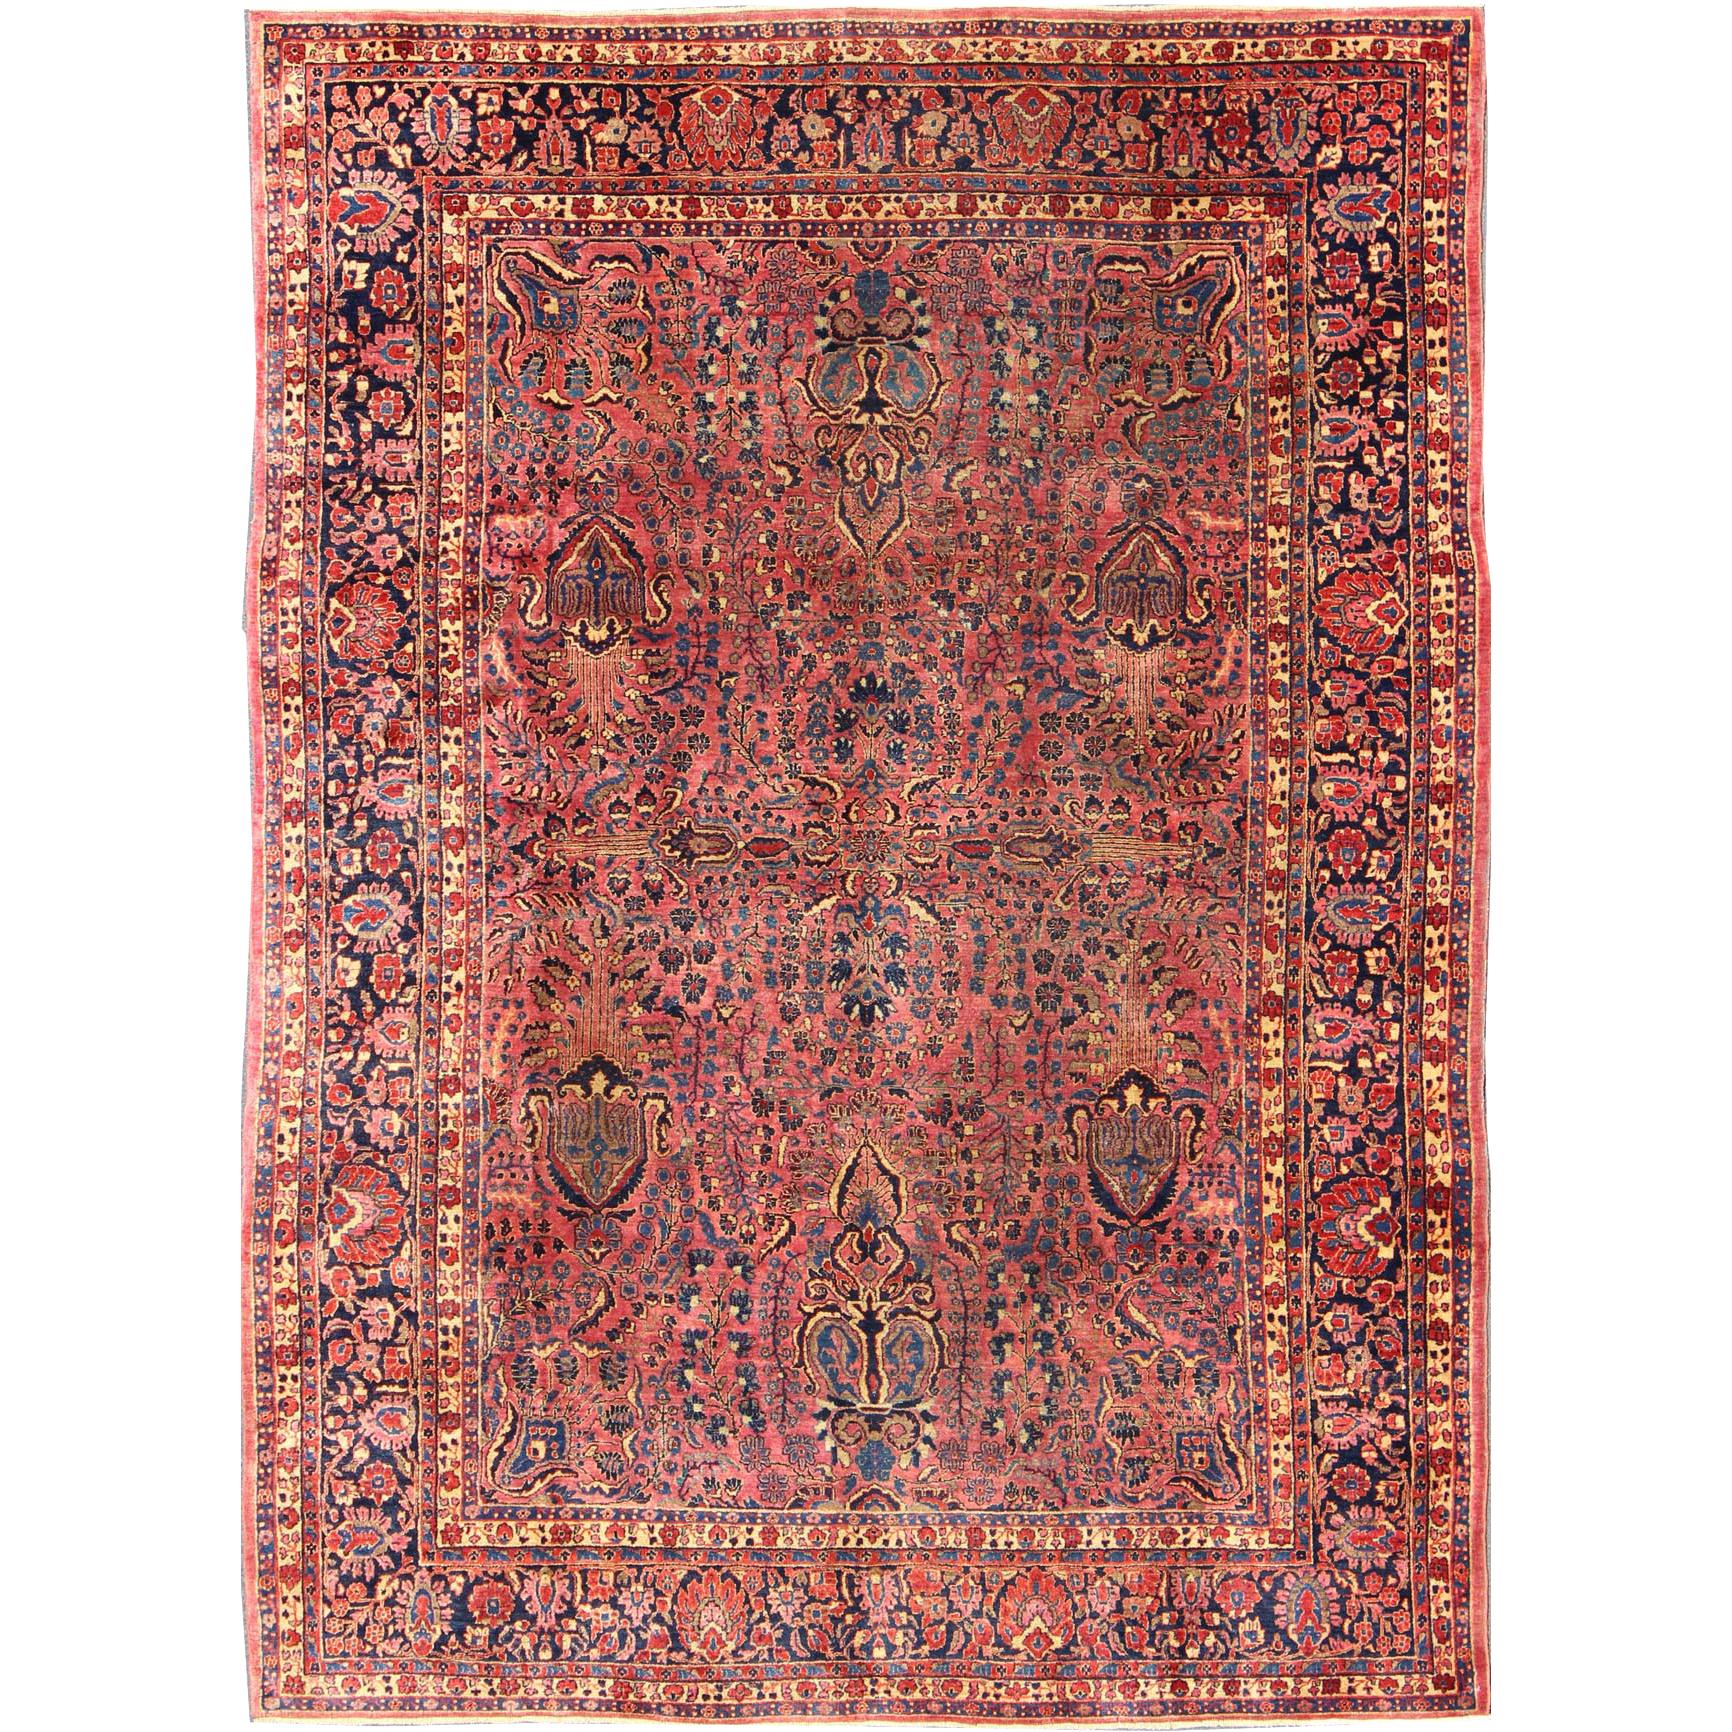 Antique Persian Sarouk Carpet with Deep Cranberry Field and Floral Elements